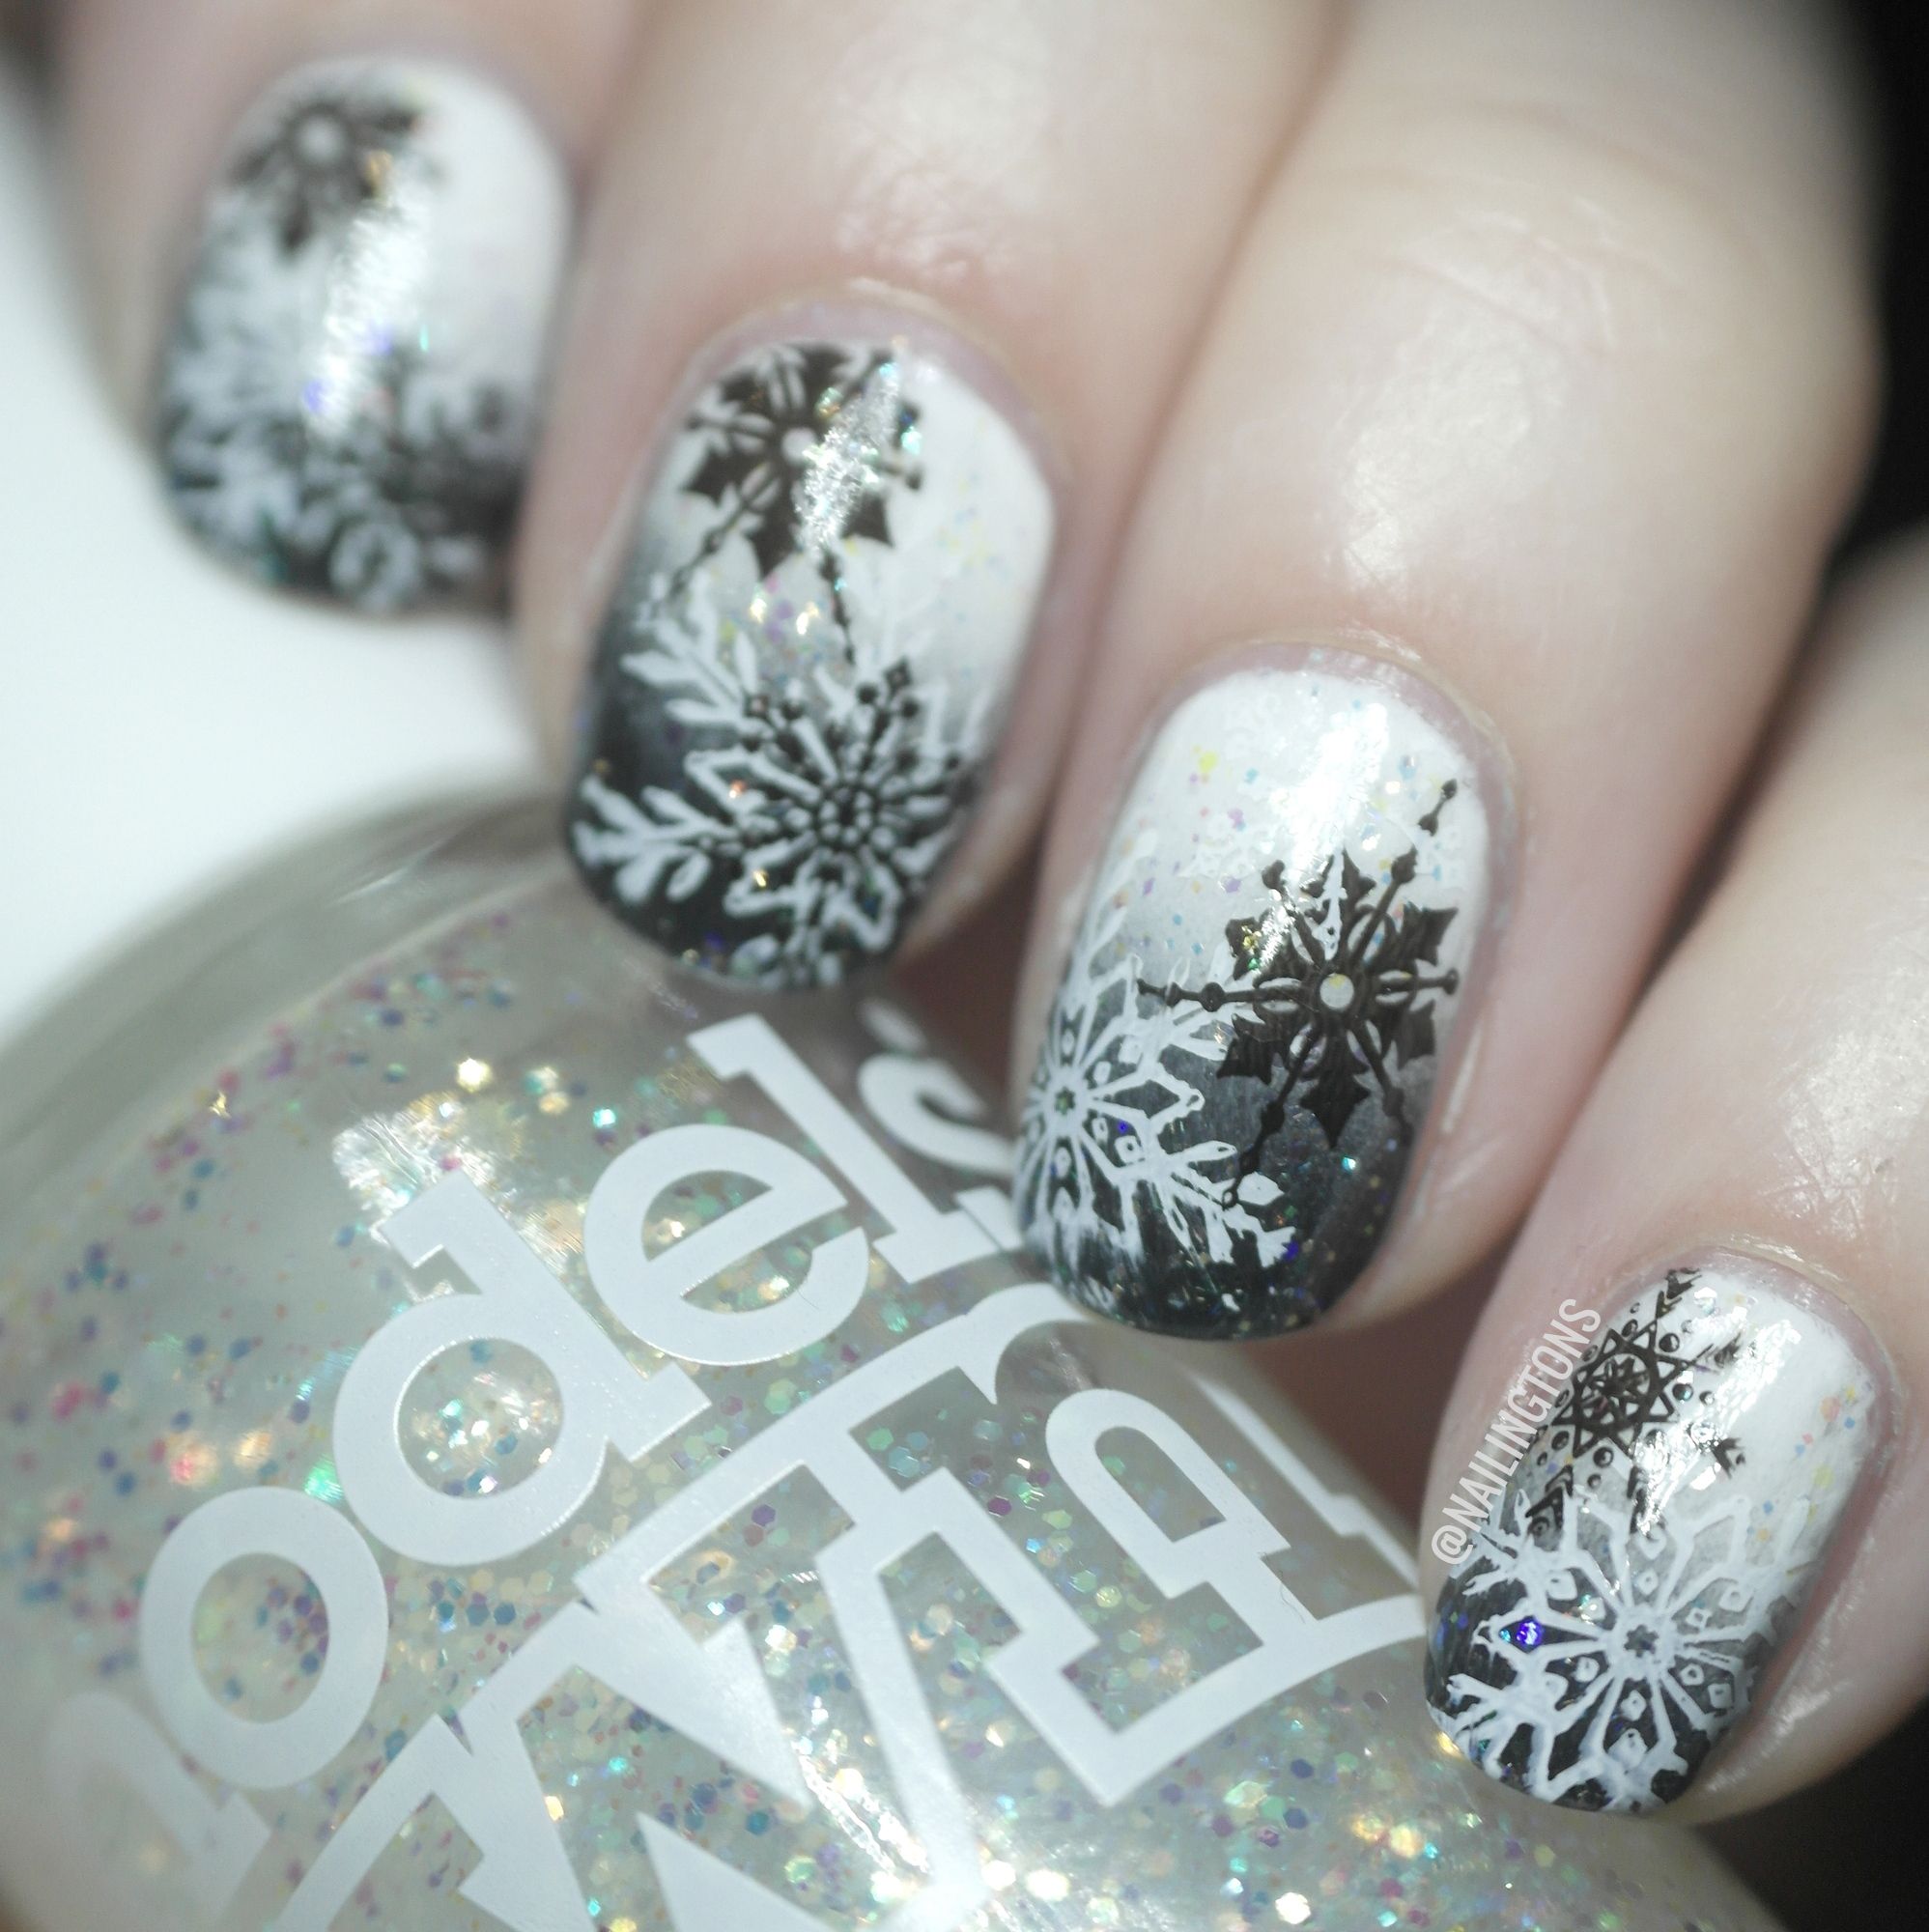 gradient black and white nails with snowflake art - Google Search ...